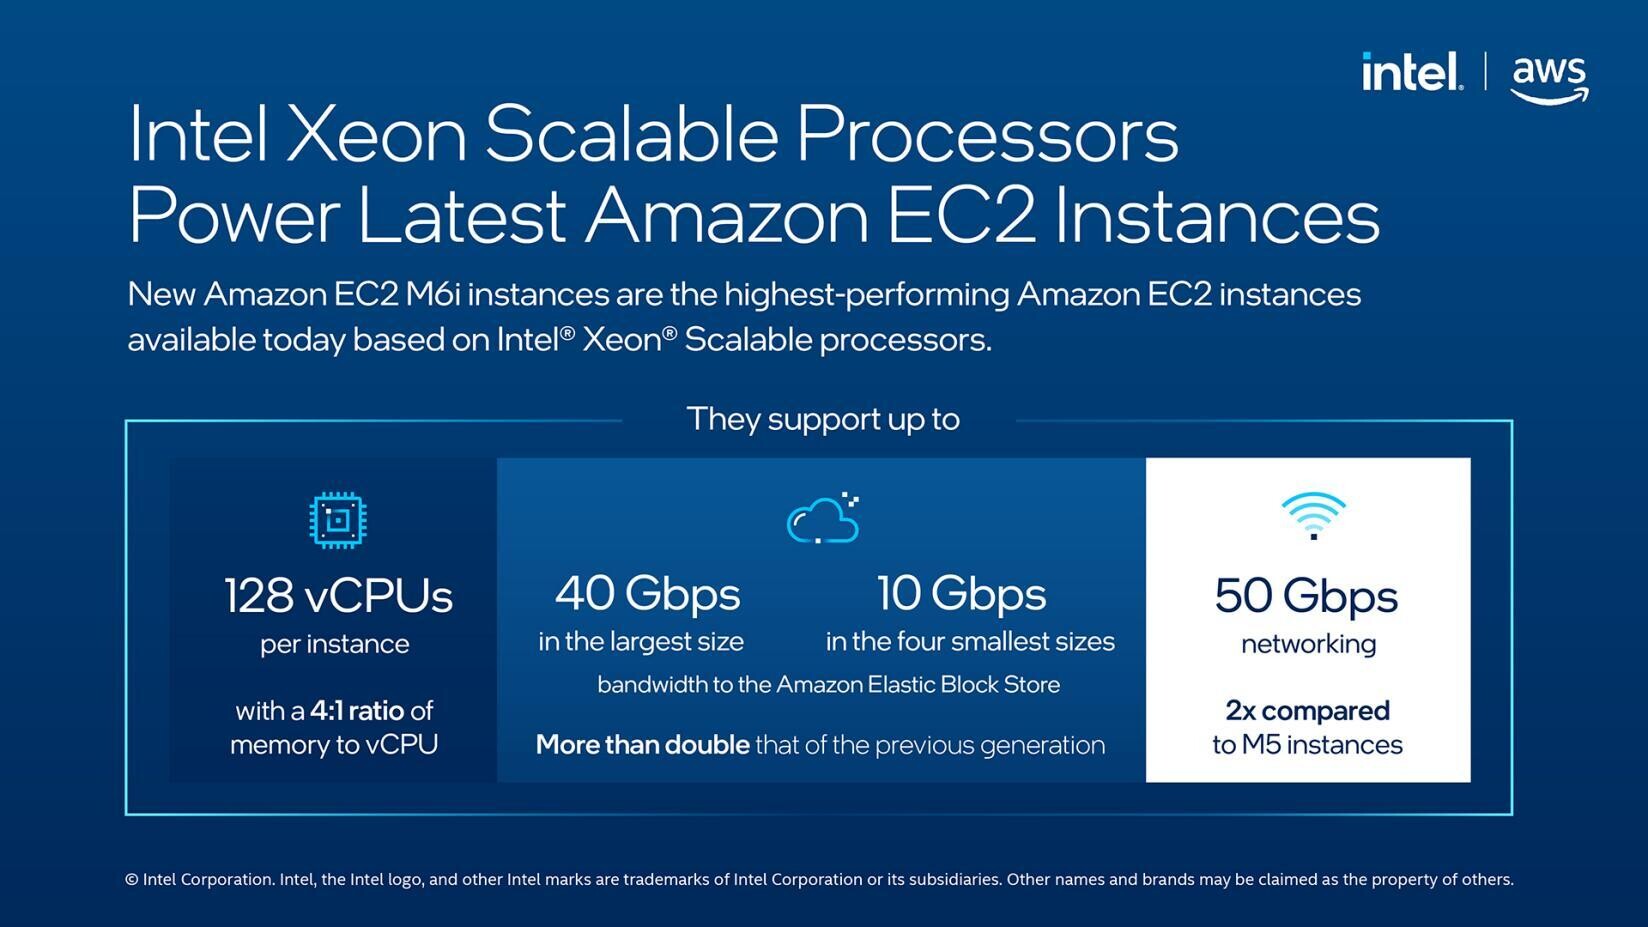 Power support intel. Intel Xeon scalable Processors. Xeon scalable 3. Amazon ec2. Powered by Intel.